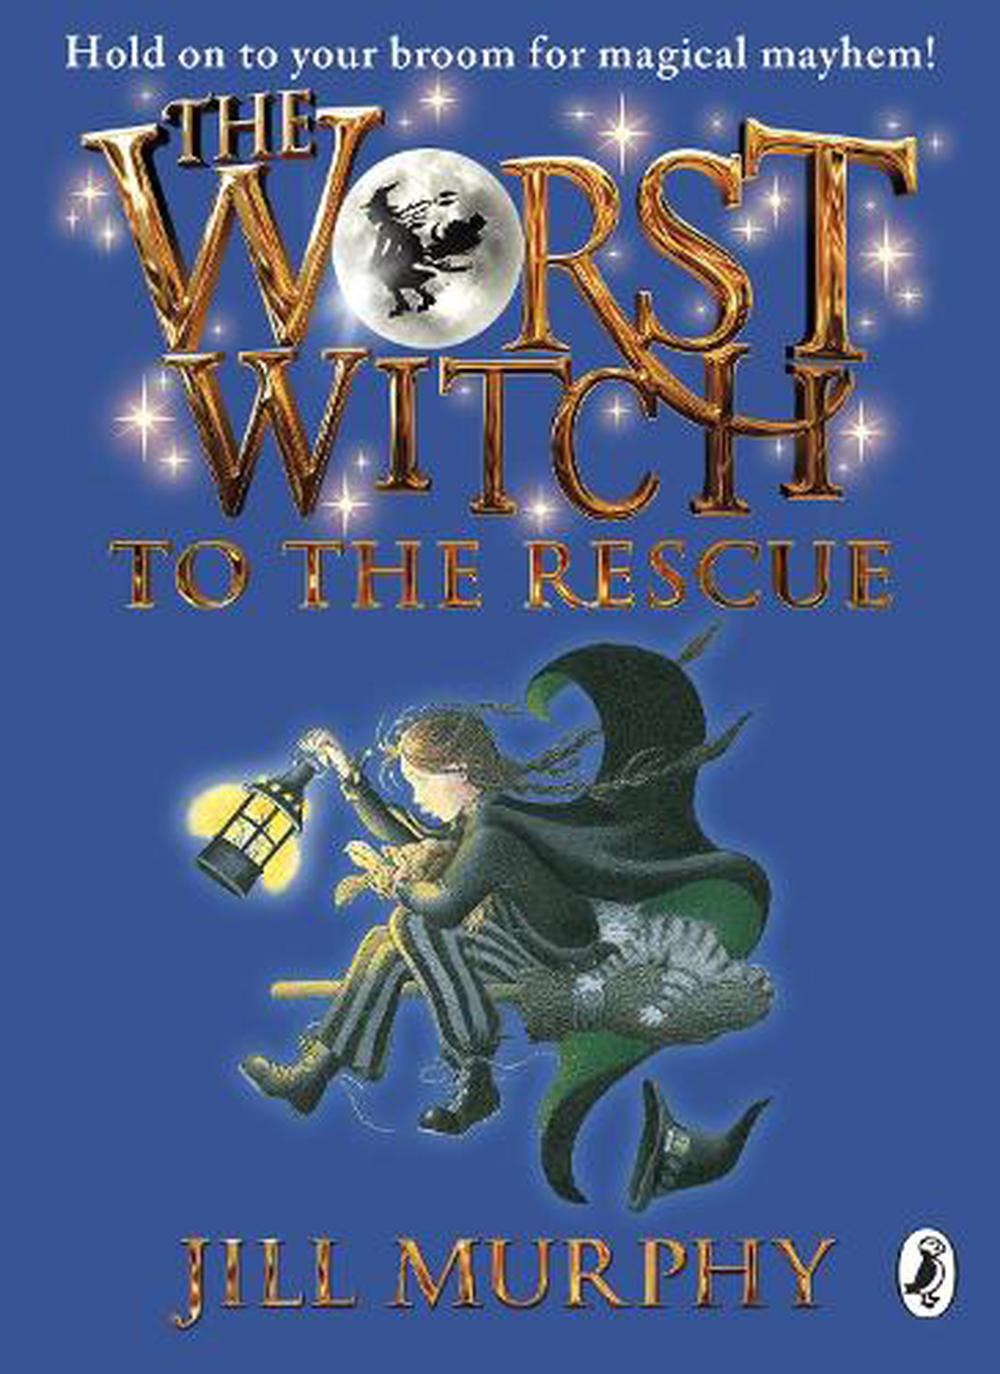 the worst witch at sea